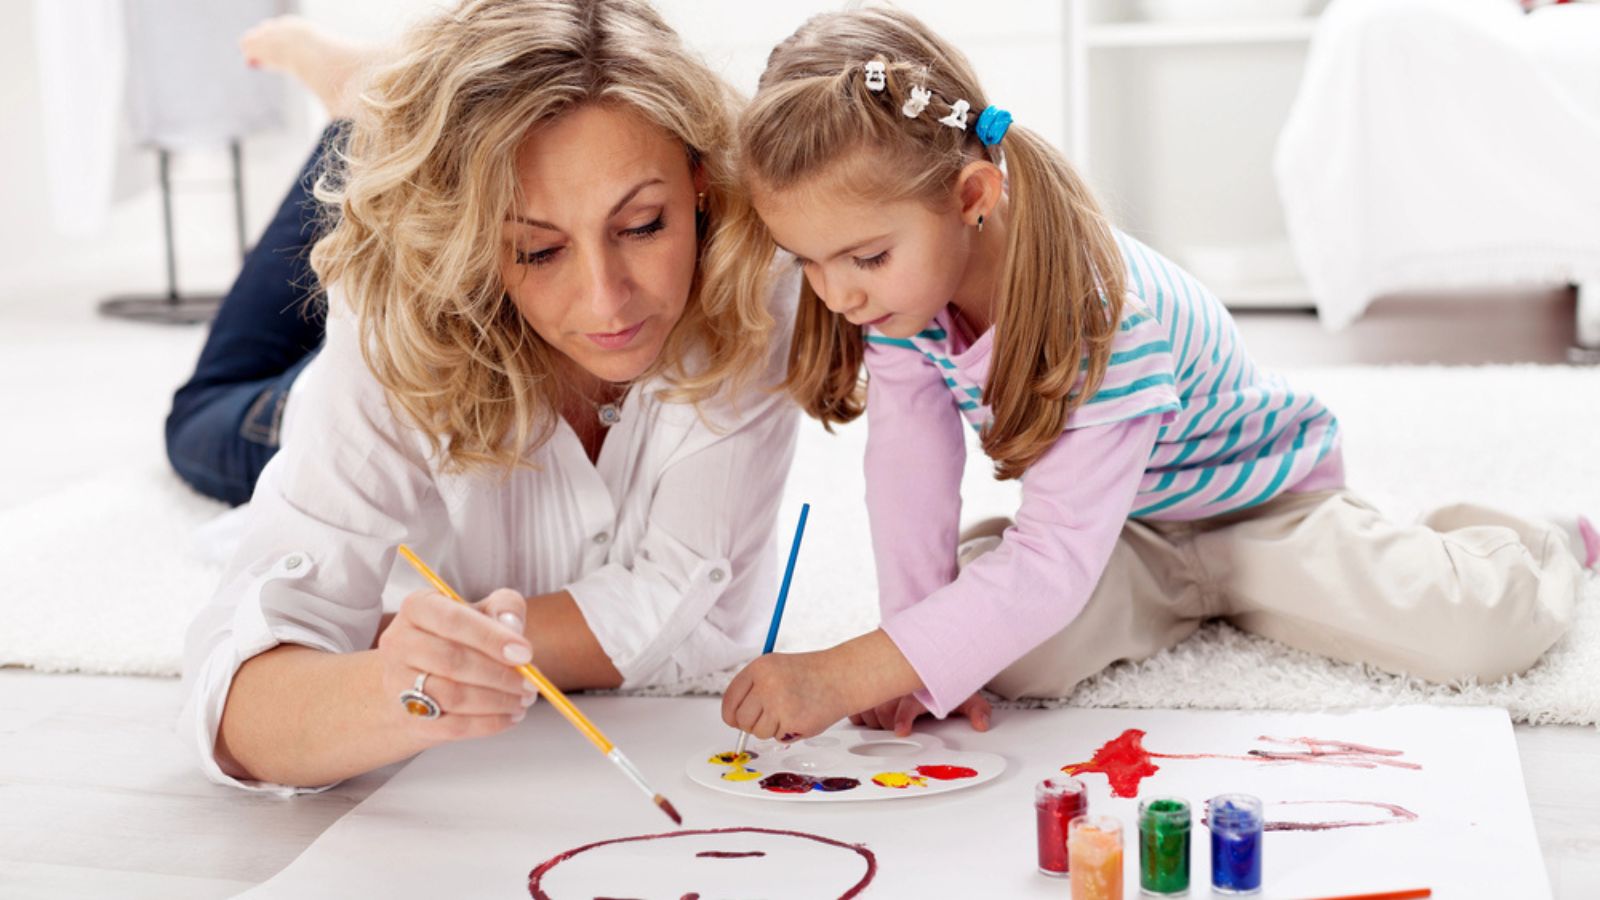 Little girl painting with her mother